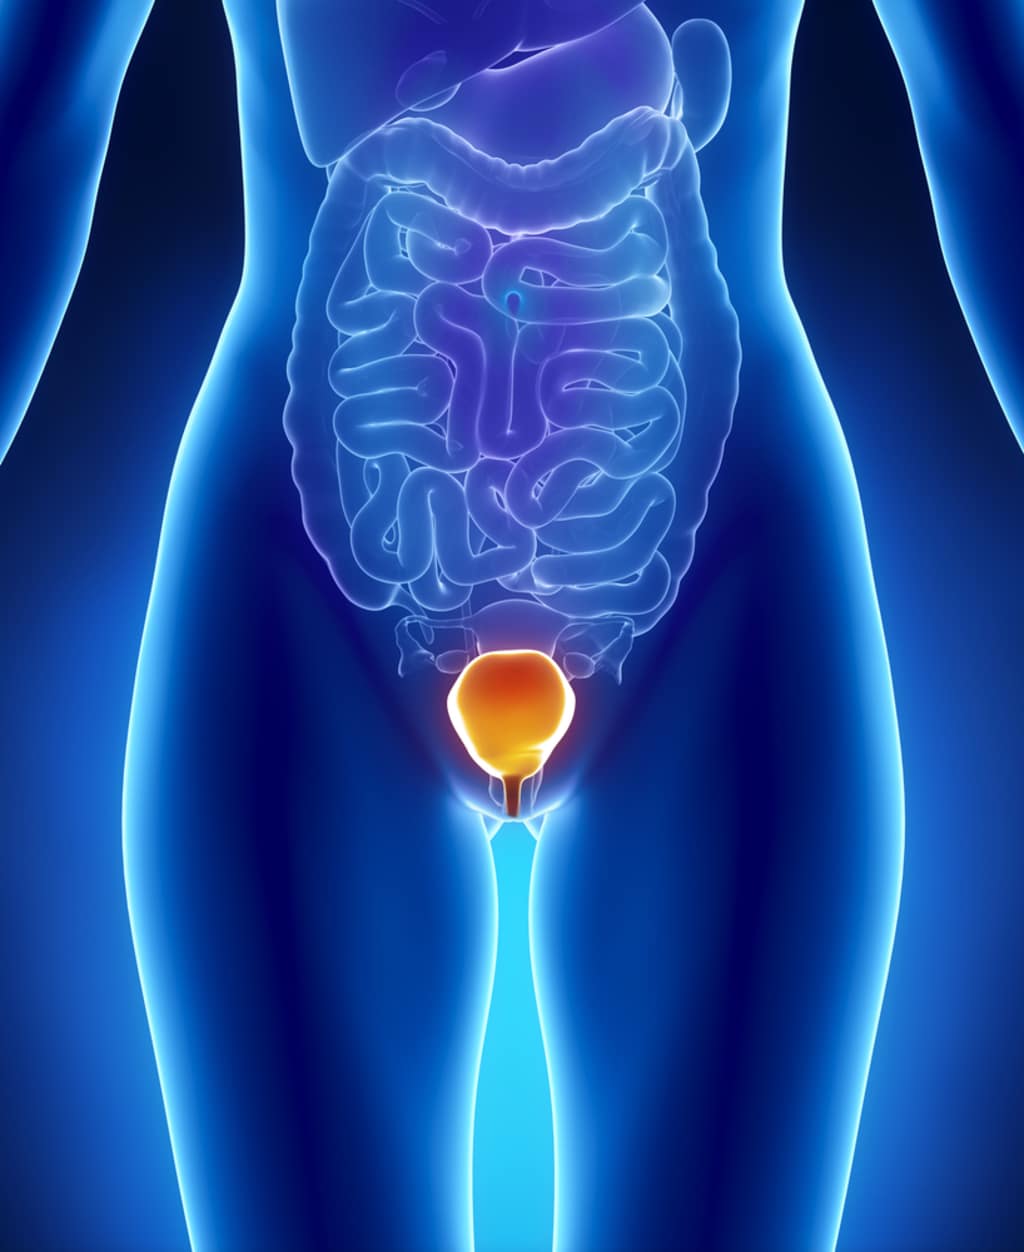 Urinary tract infections in women